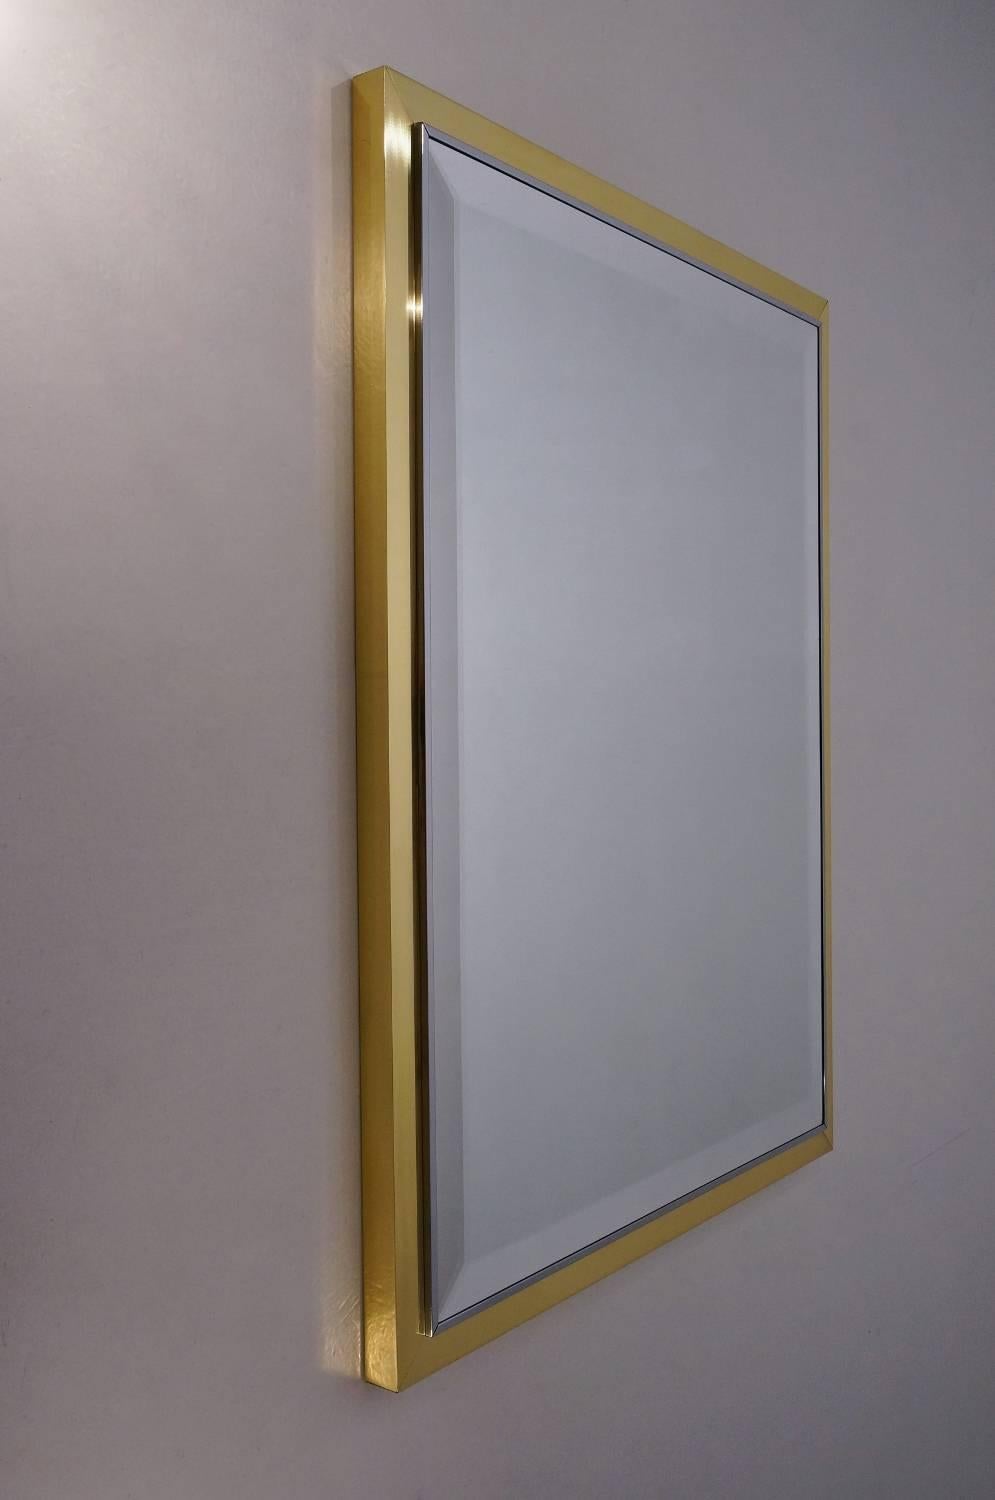 Late 20th Century Willy Rizzo Wall Mirror, Brass and Chrome, circa 1970s, Italian